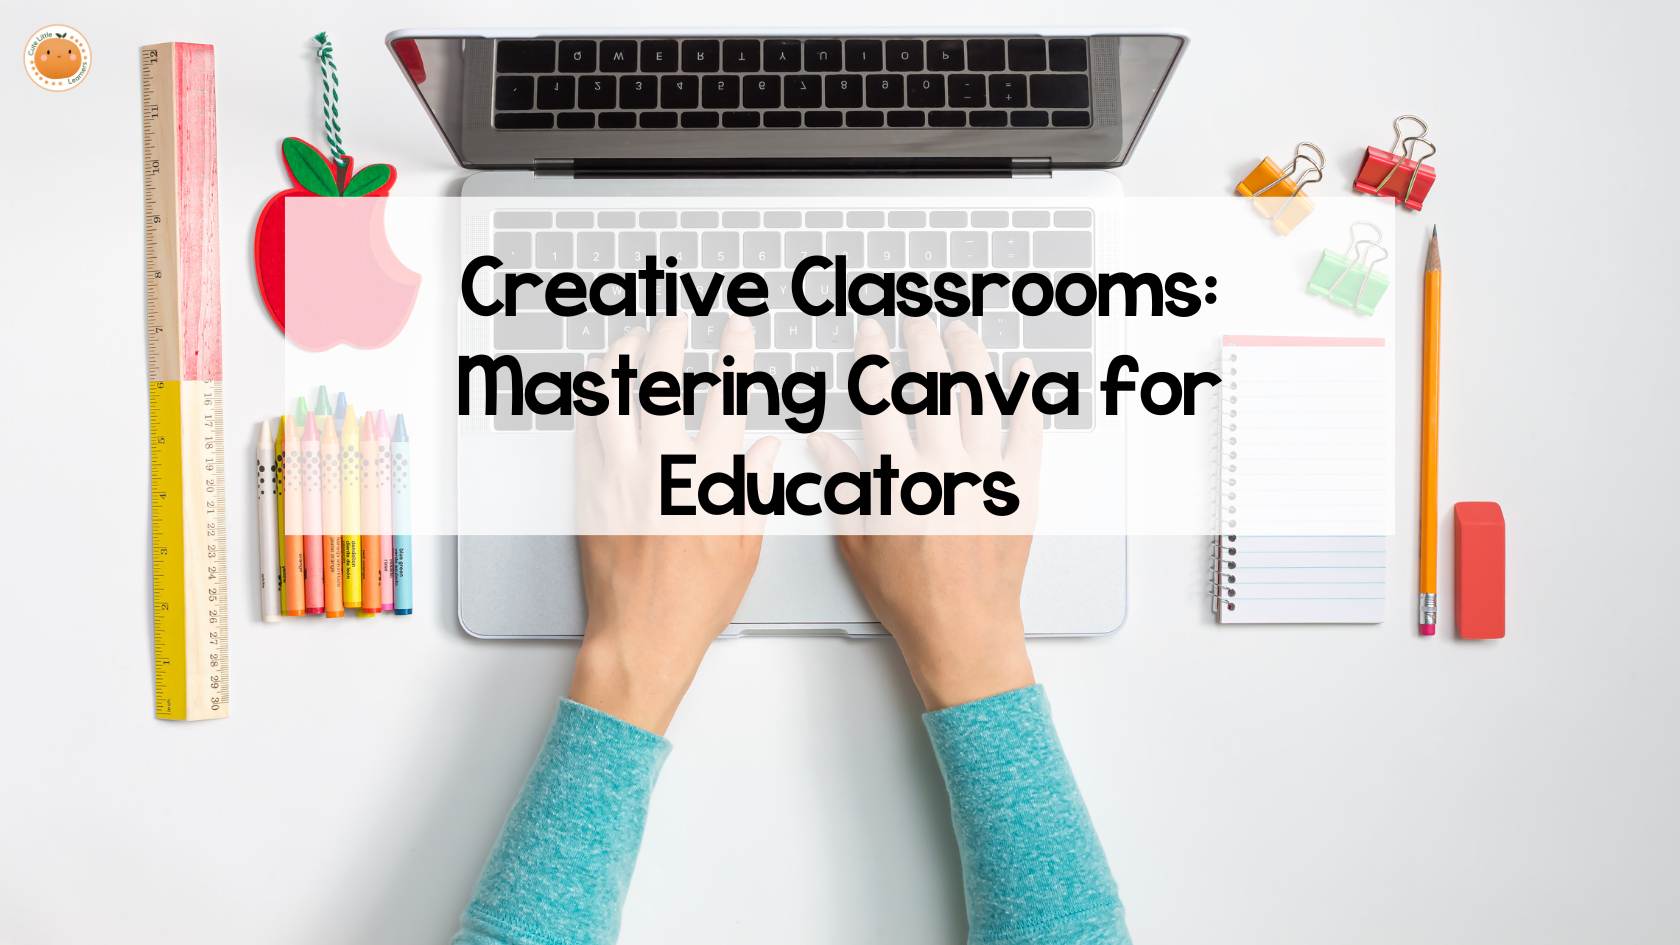 Canva for Educators: Transforming Classrooms with Creativity